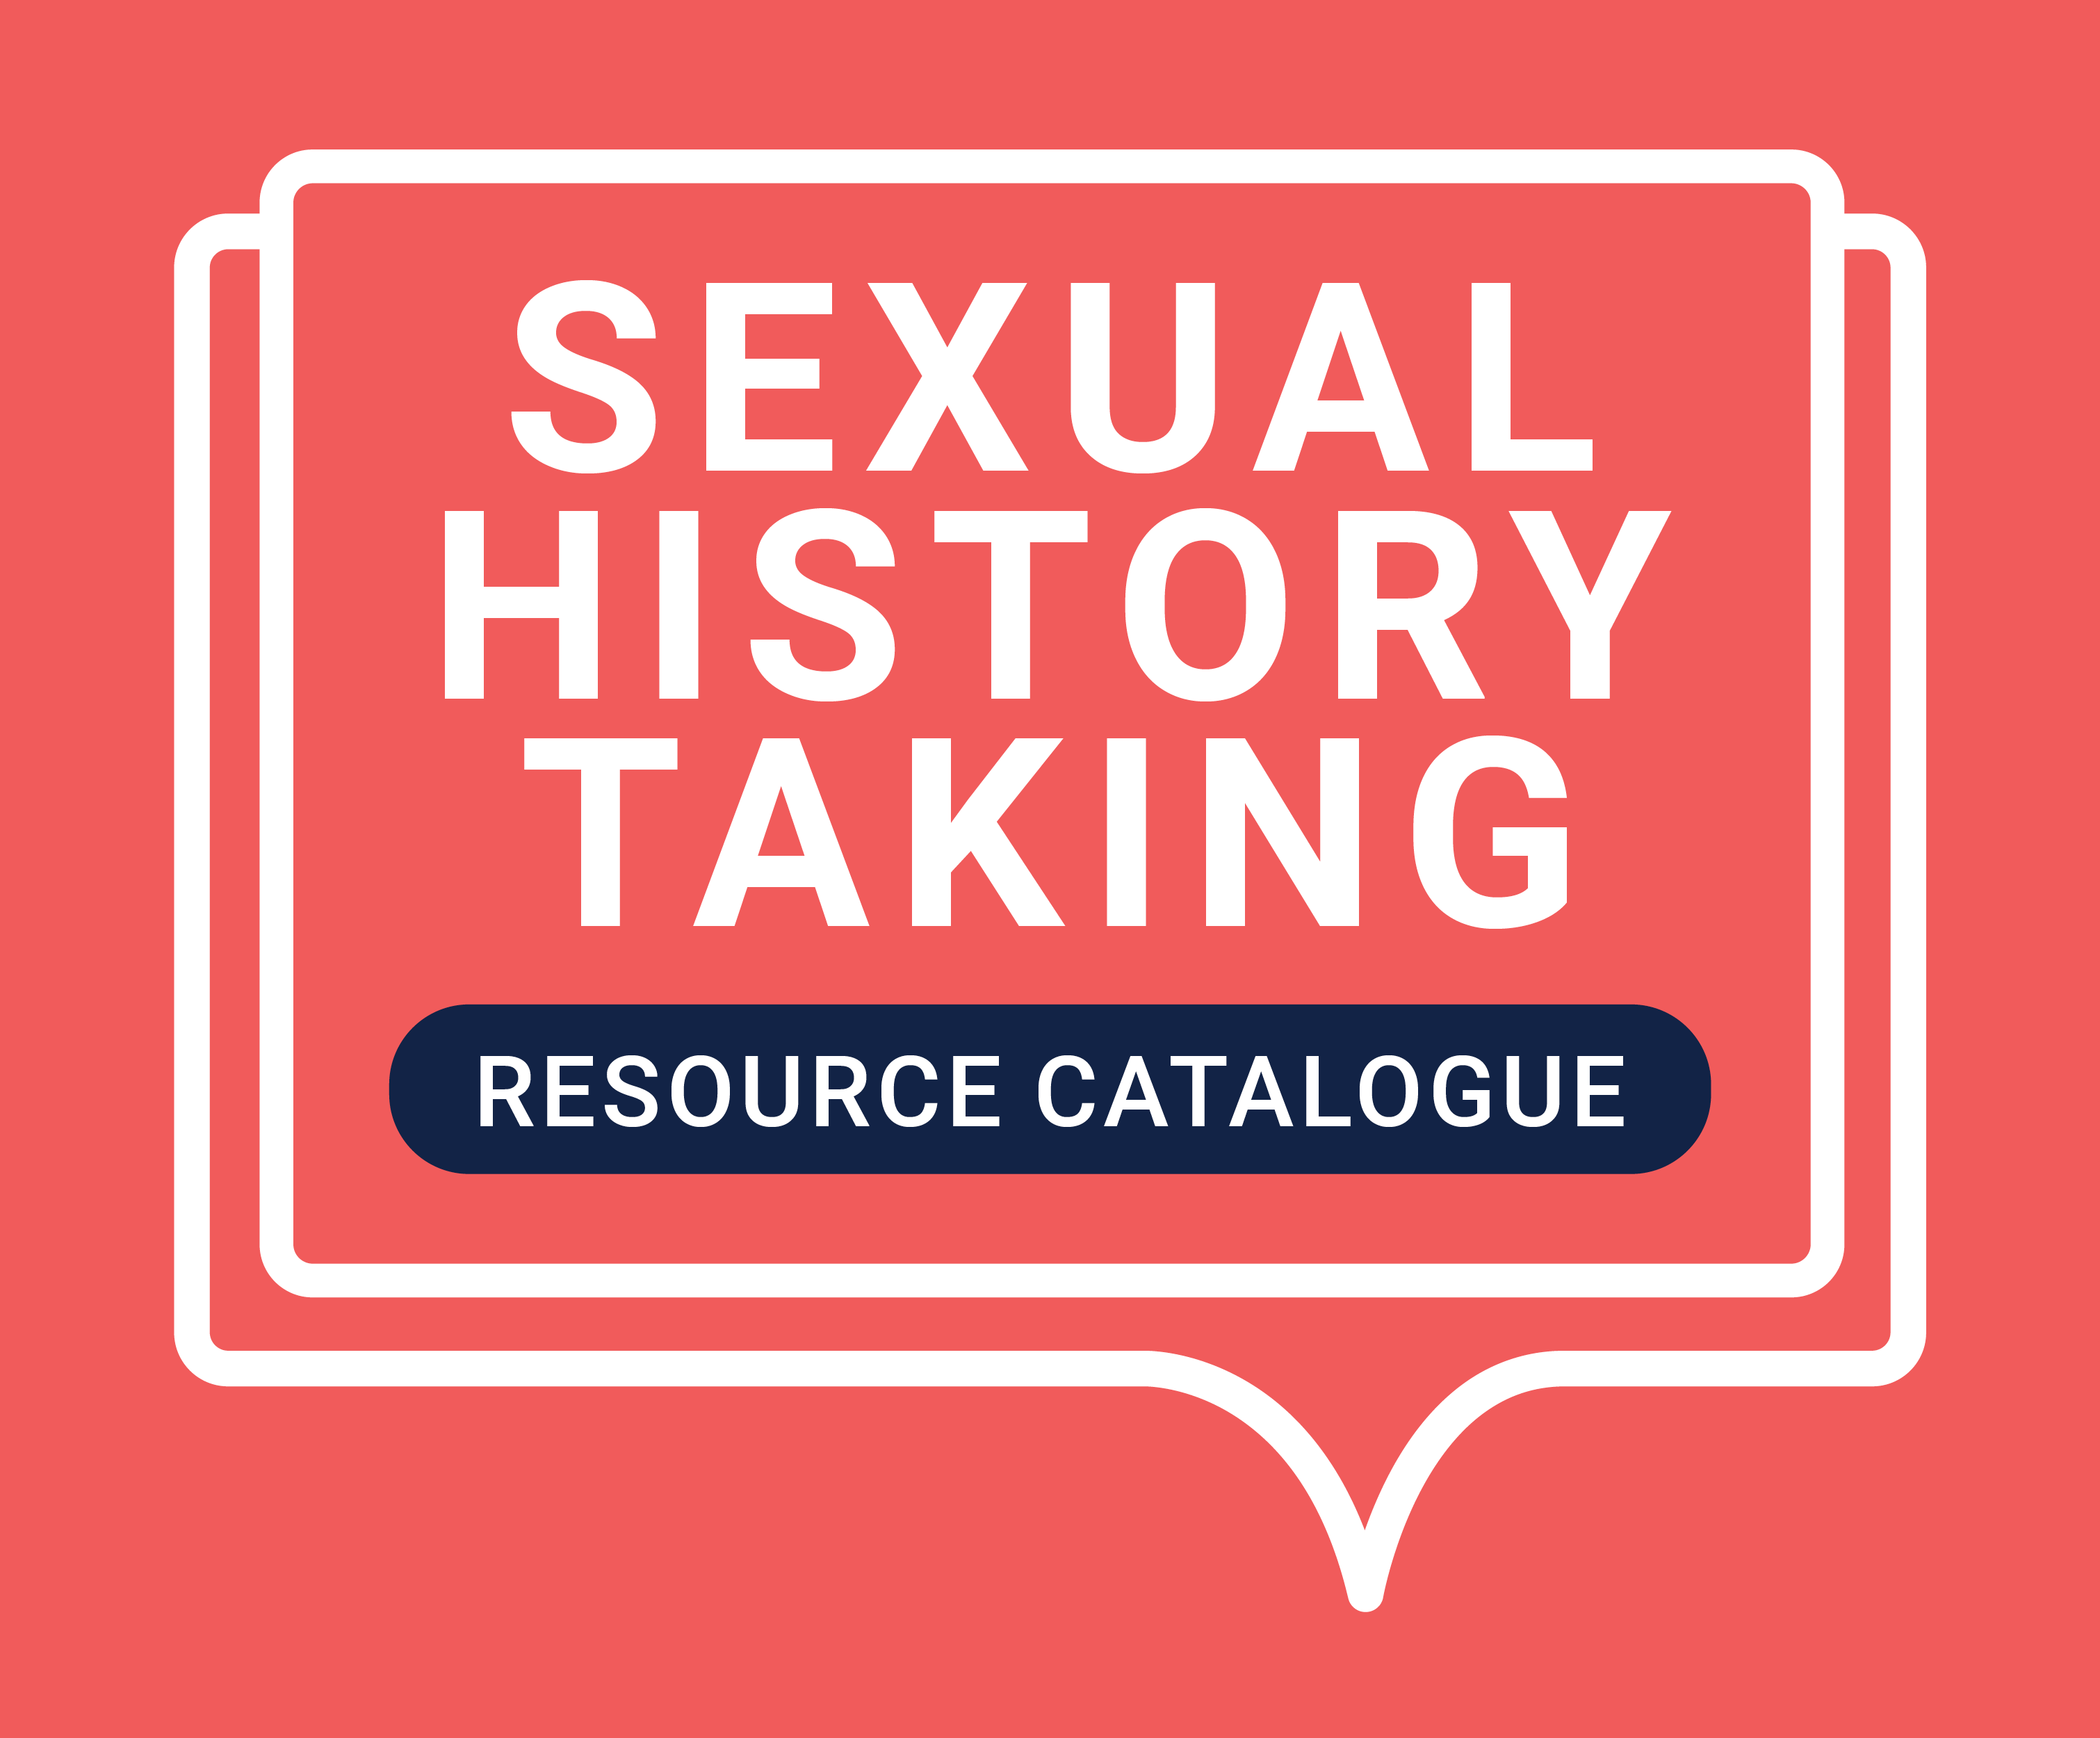 Sexual History Taking Resource Catalogue